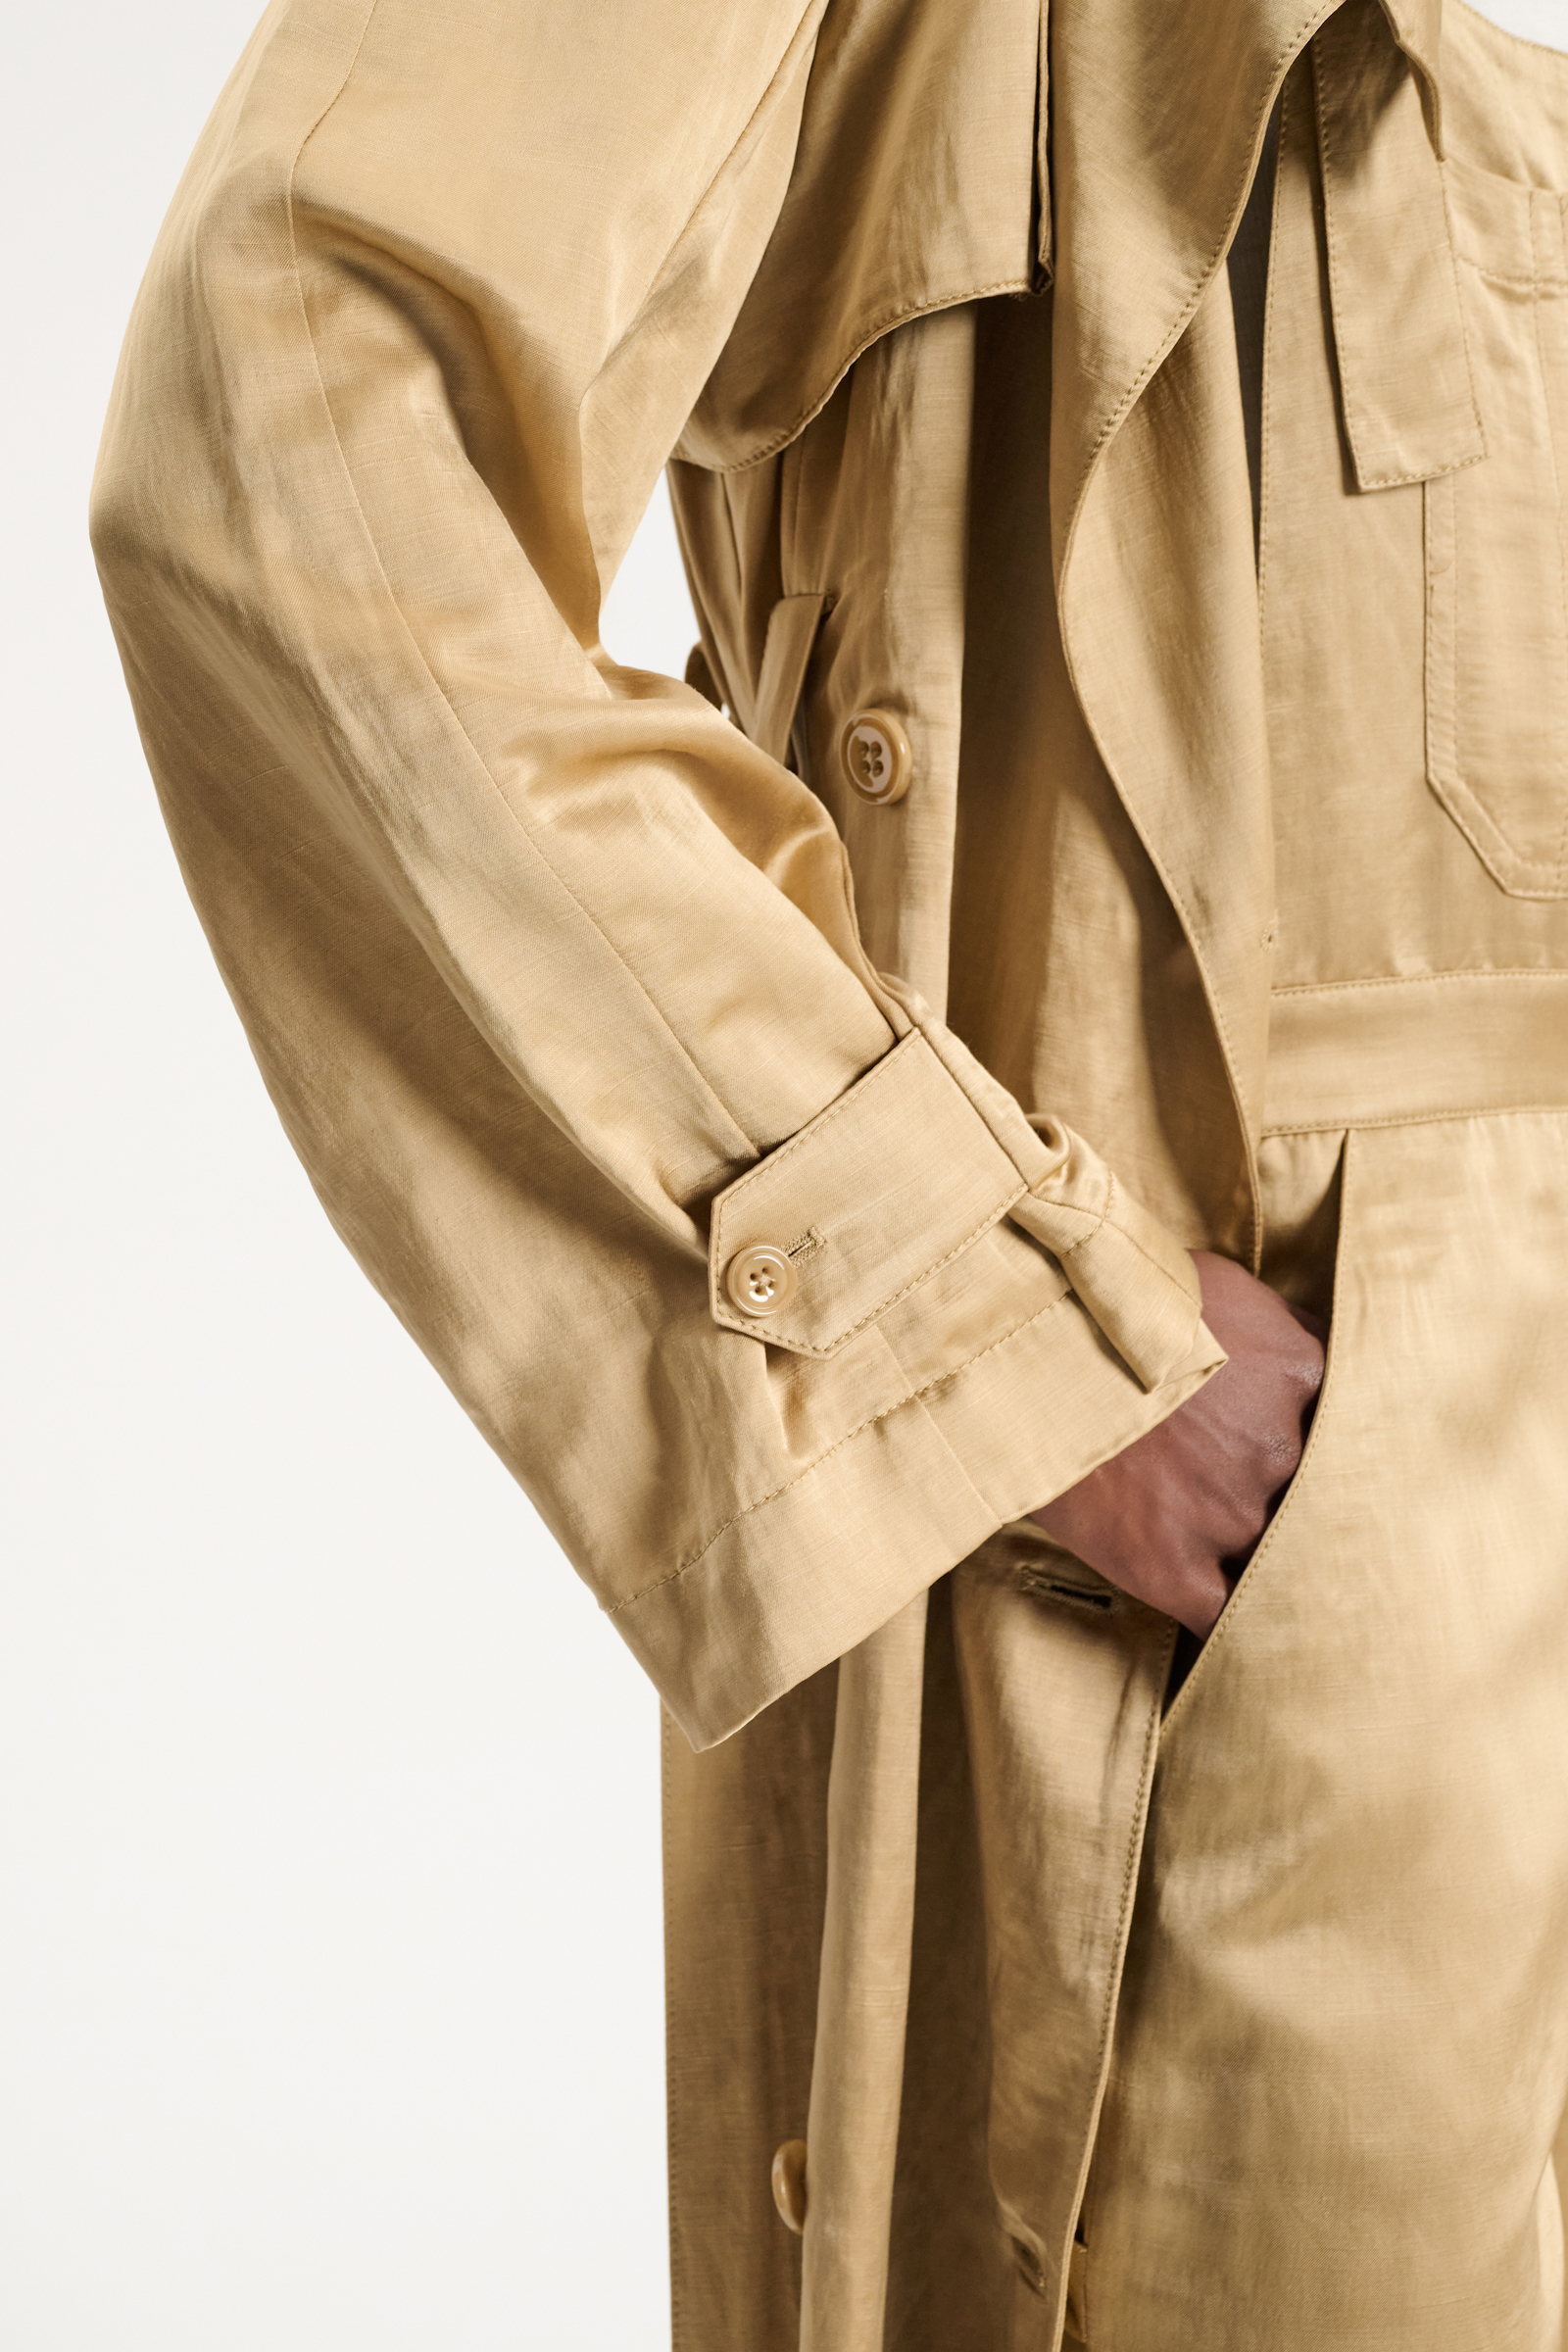 Dorothee Schumacher Slouchy, double-breasted trench coat warm beige